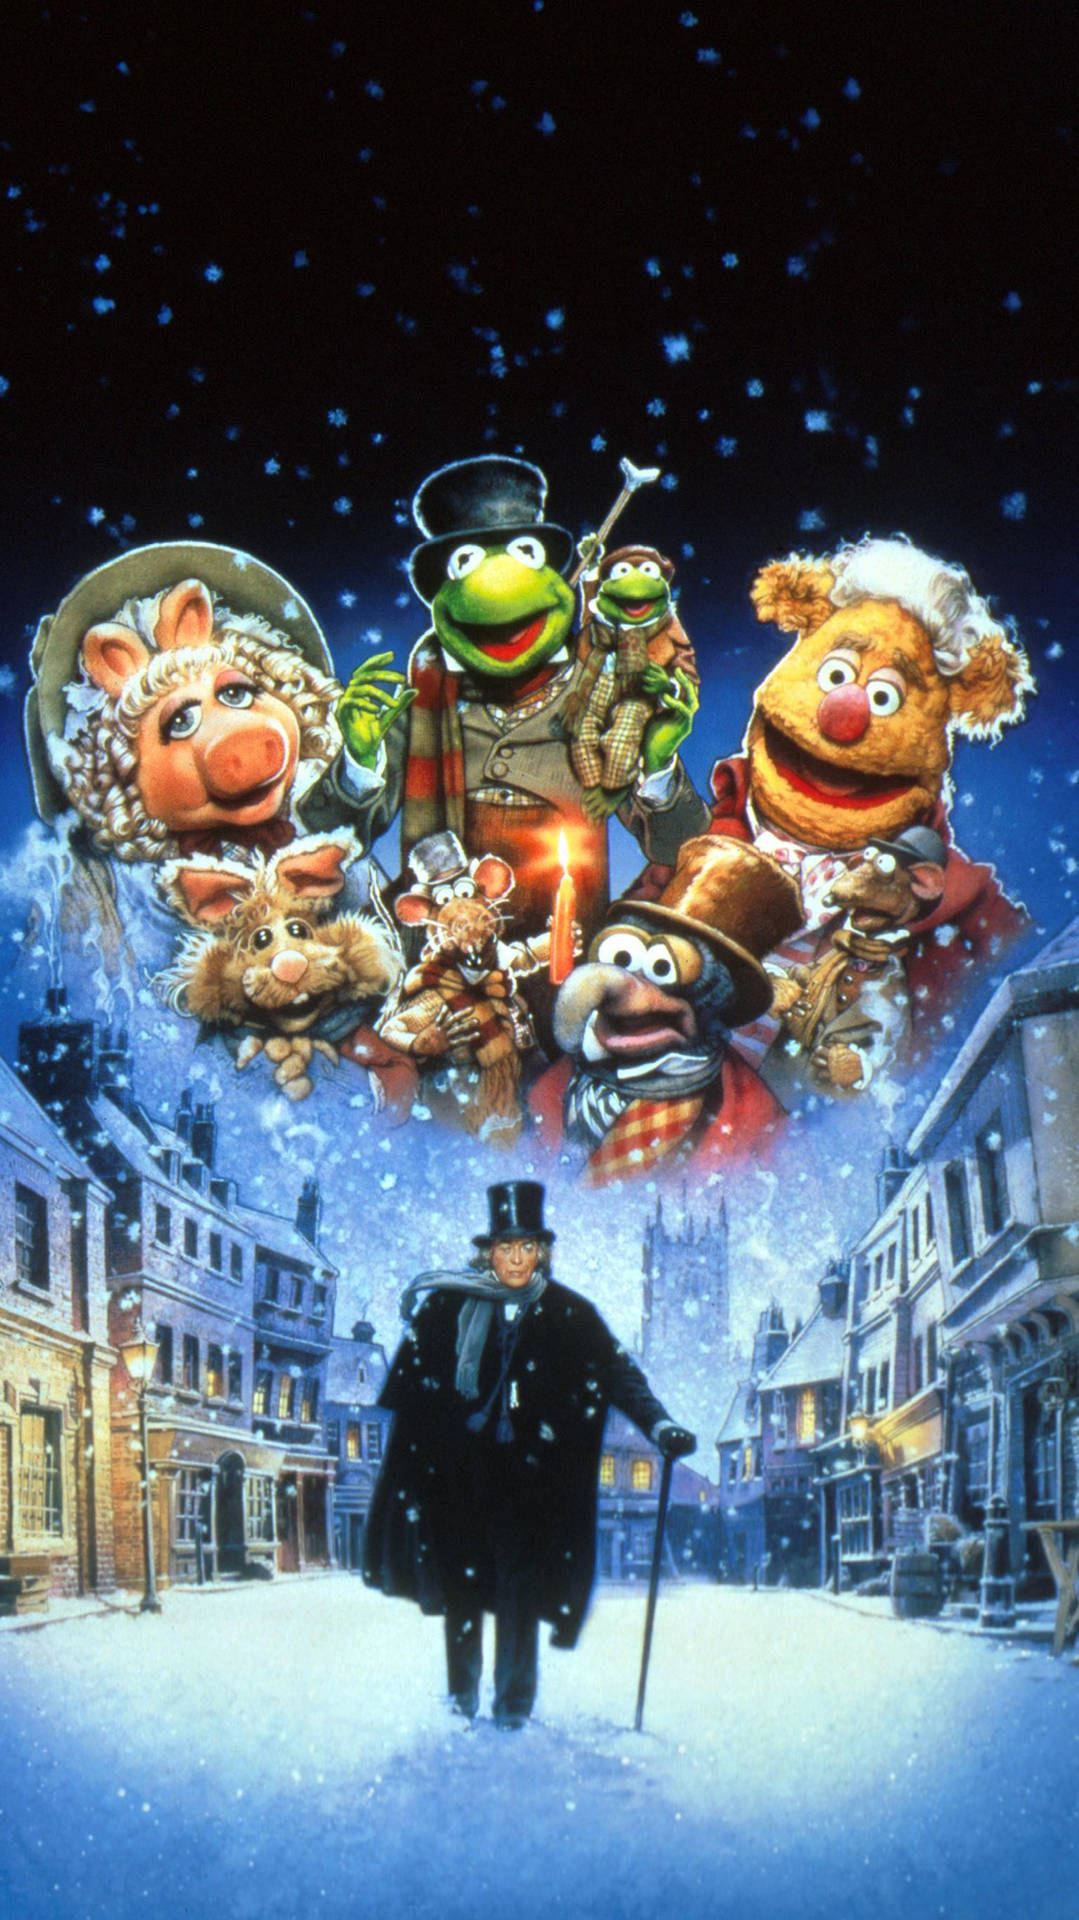 Scrooge In The Muppets: A Christmas Carol